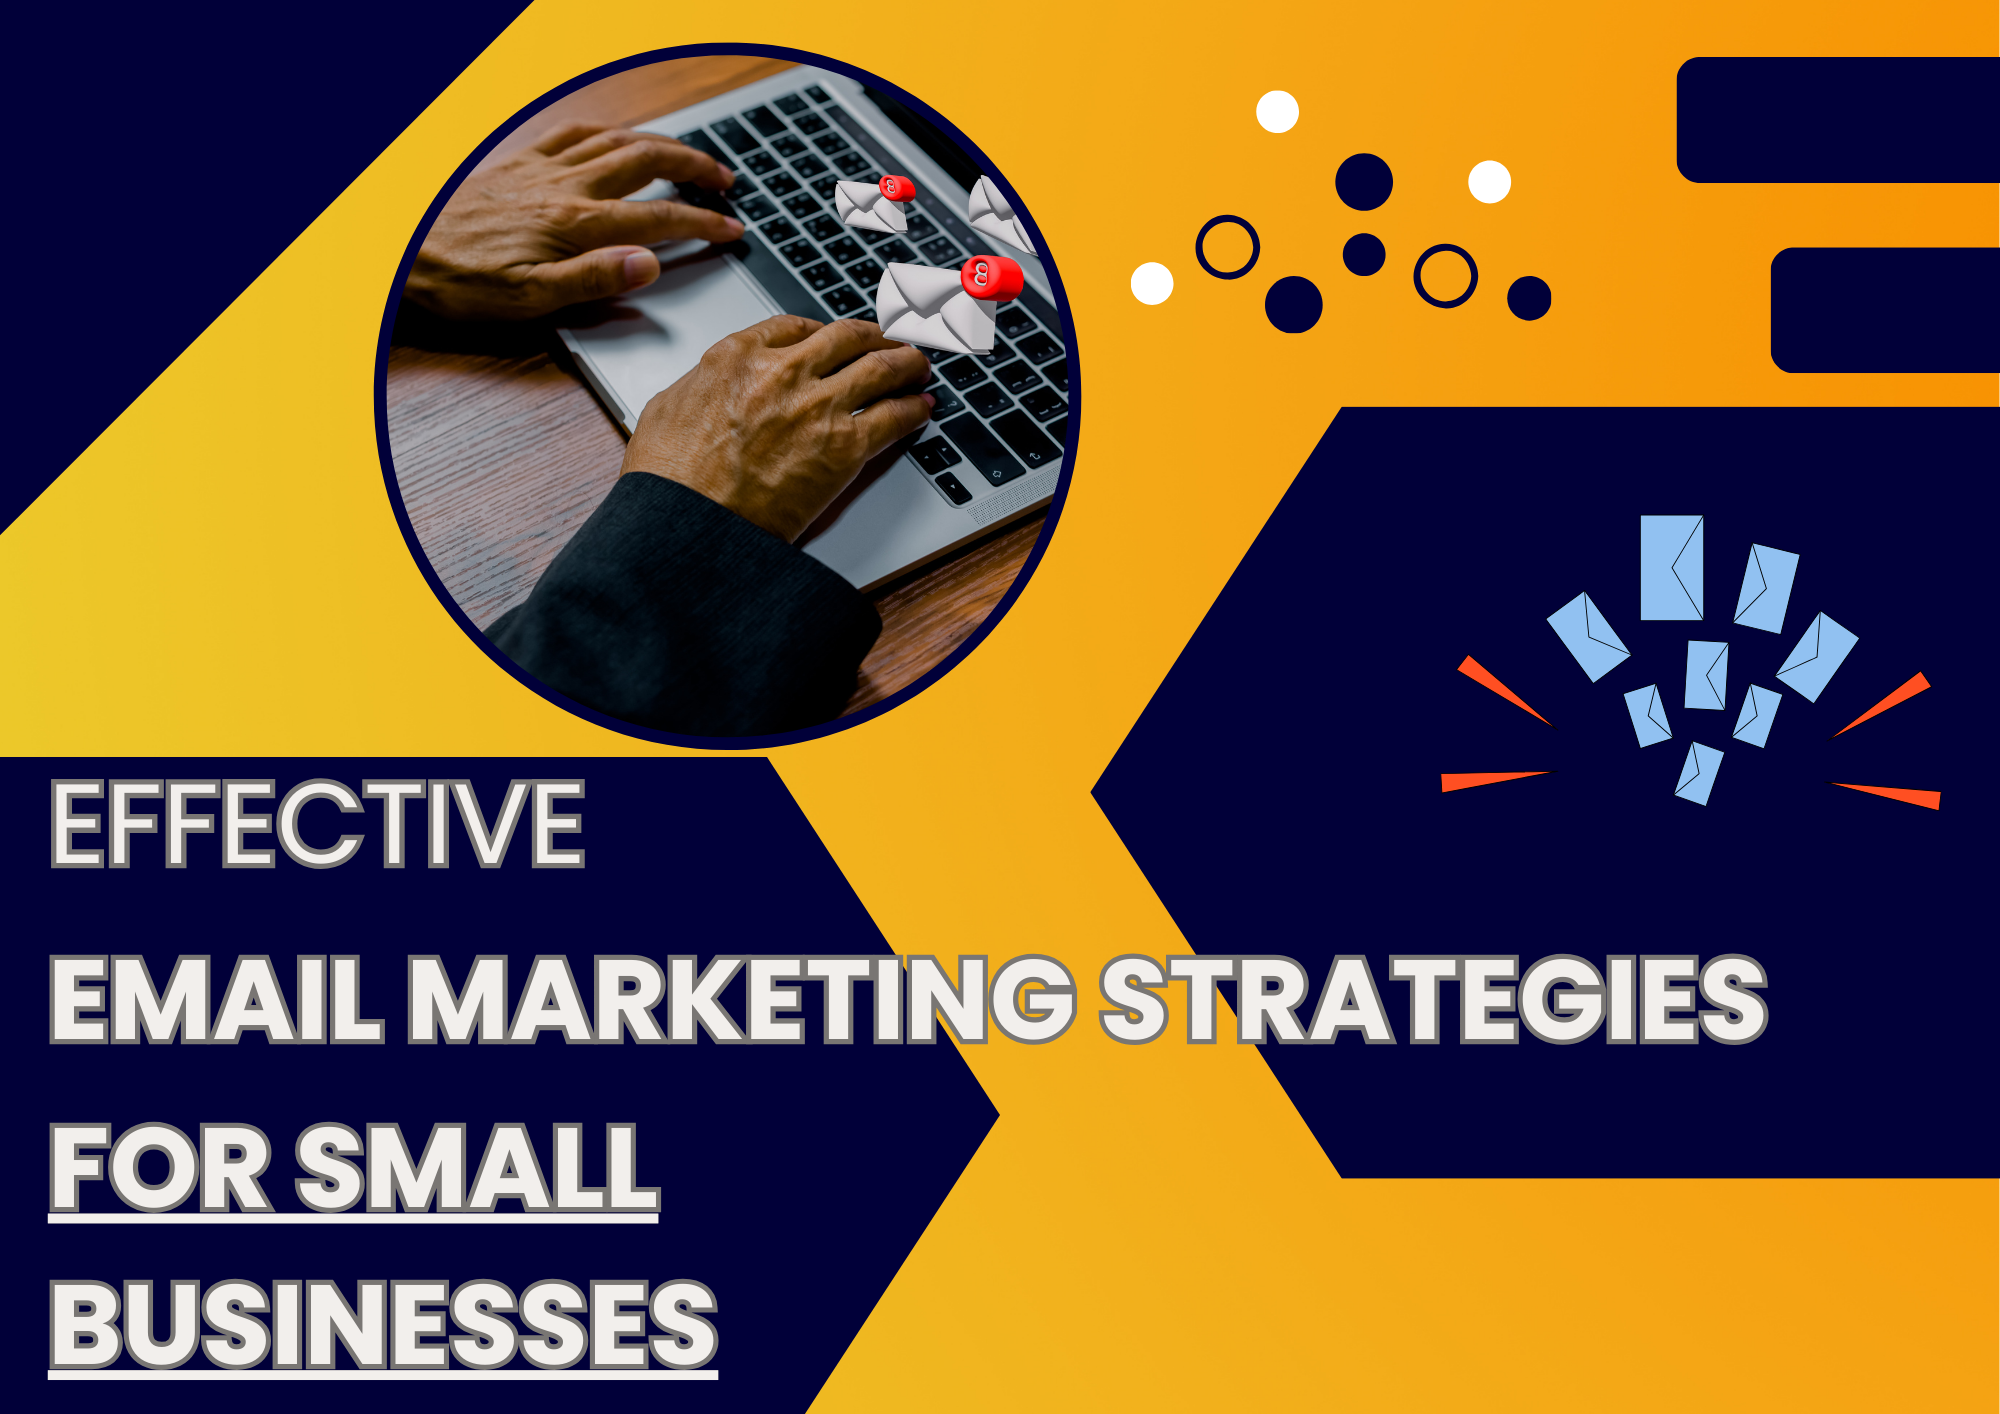 Effective email marketing strategies for small businesses